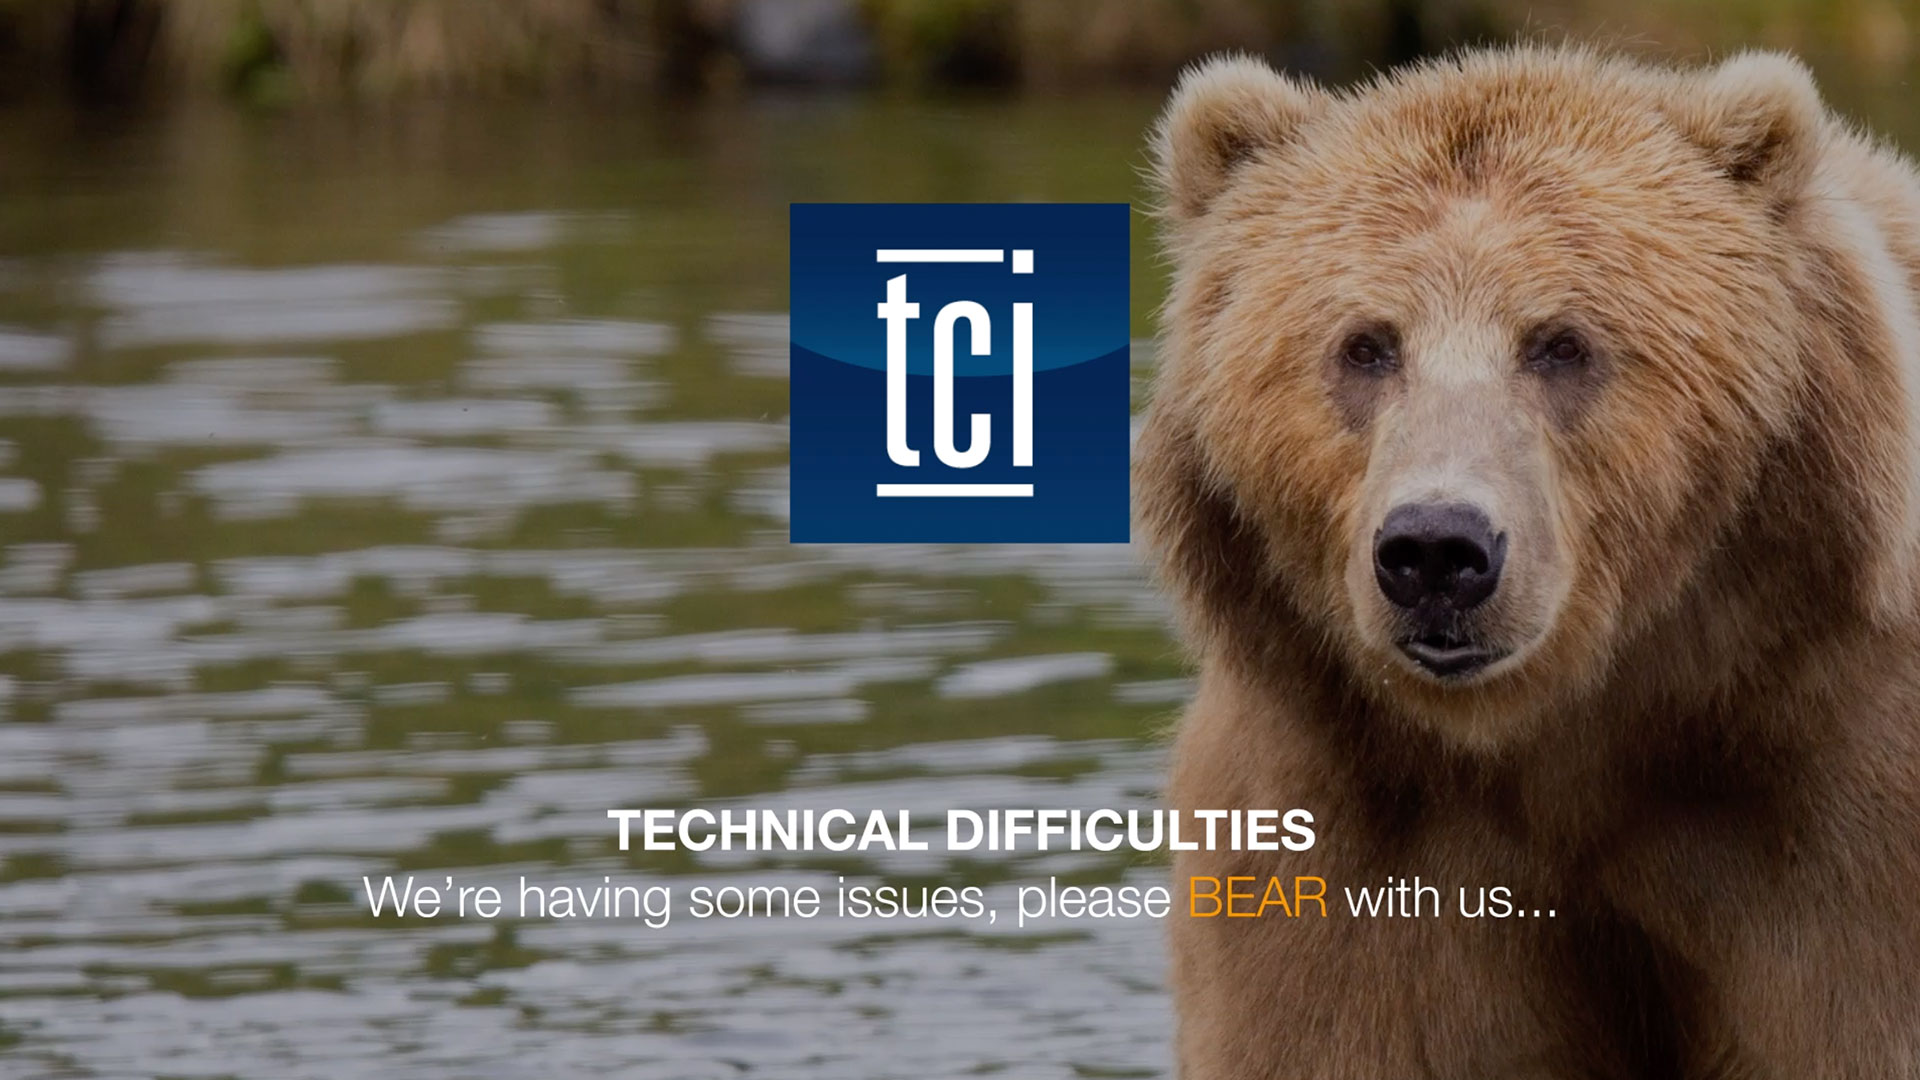 We are experiencing technical difficulties